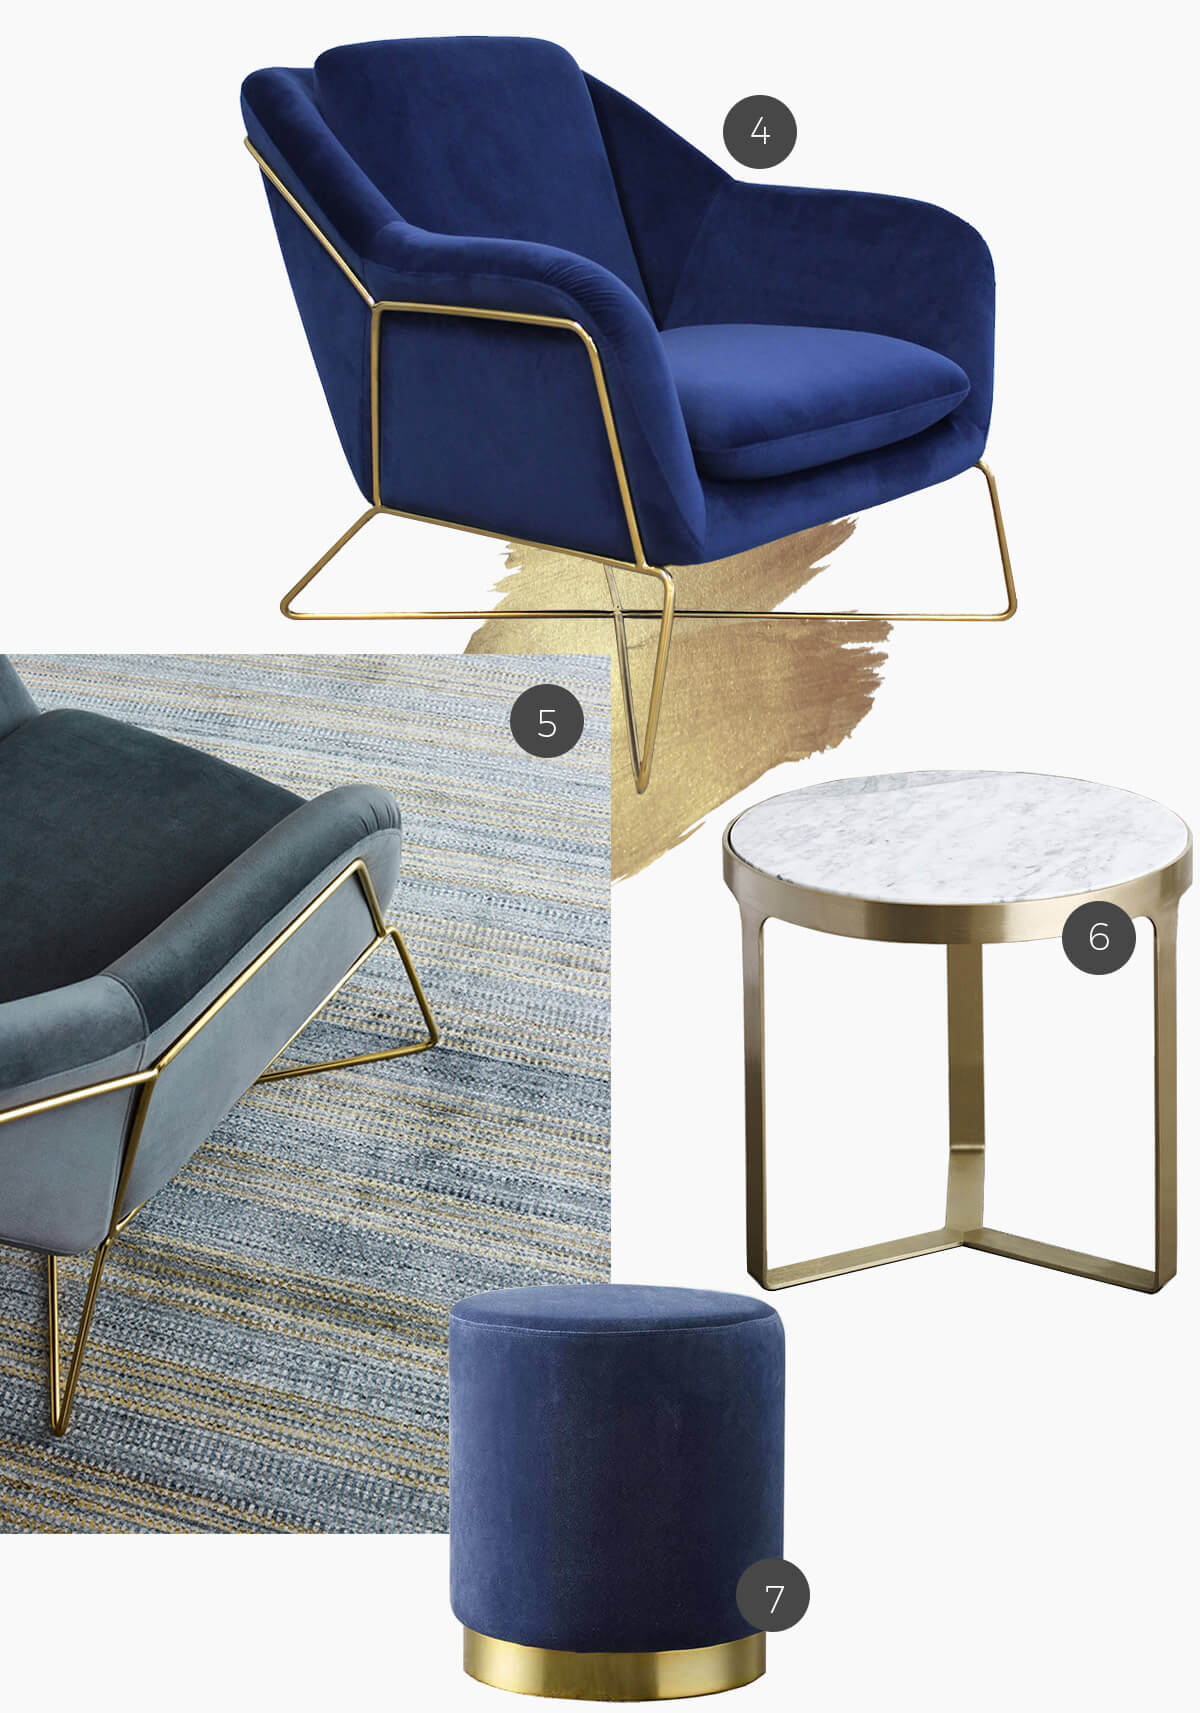 gold accents on rugs and furniture with Navy Velvet Charlotte occasional chair